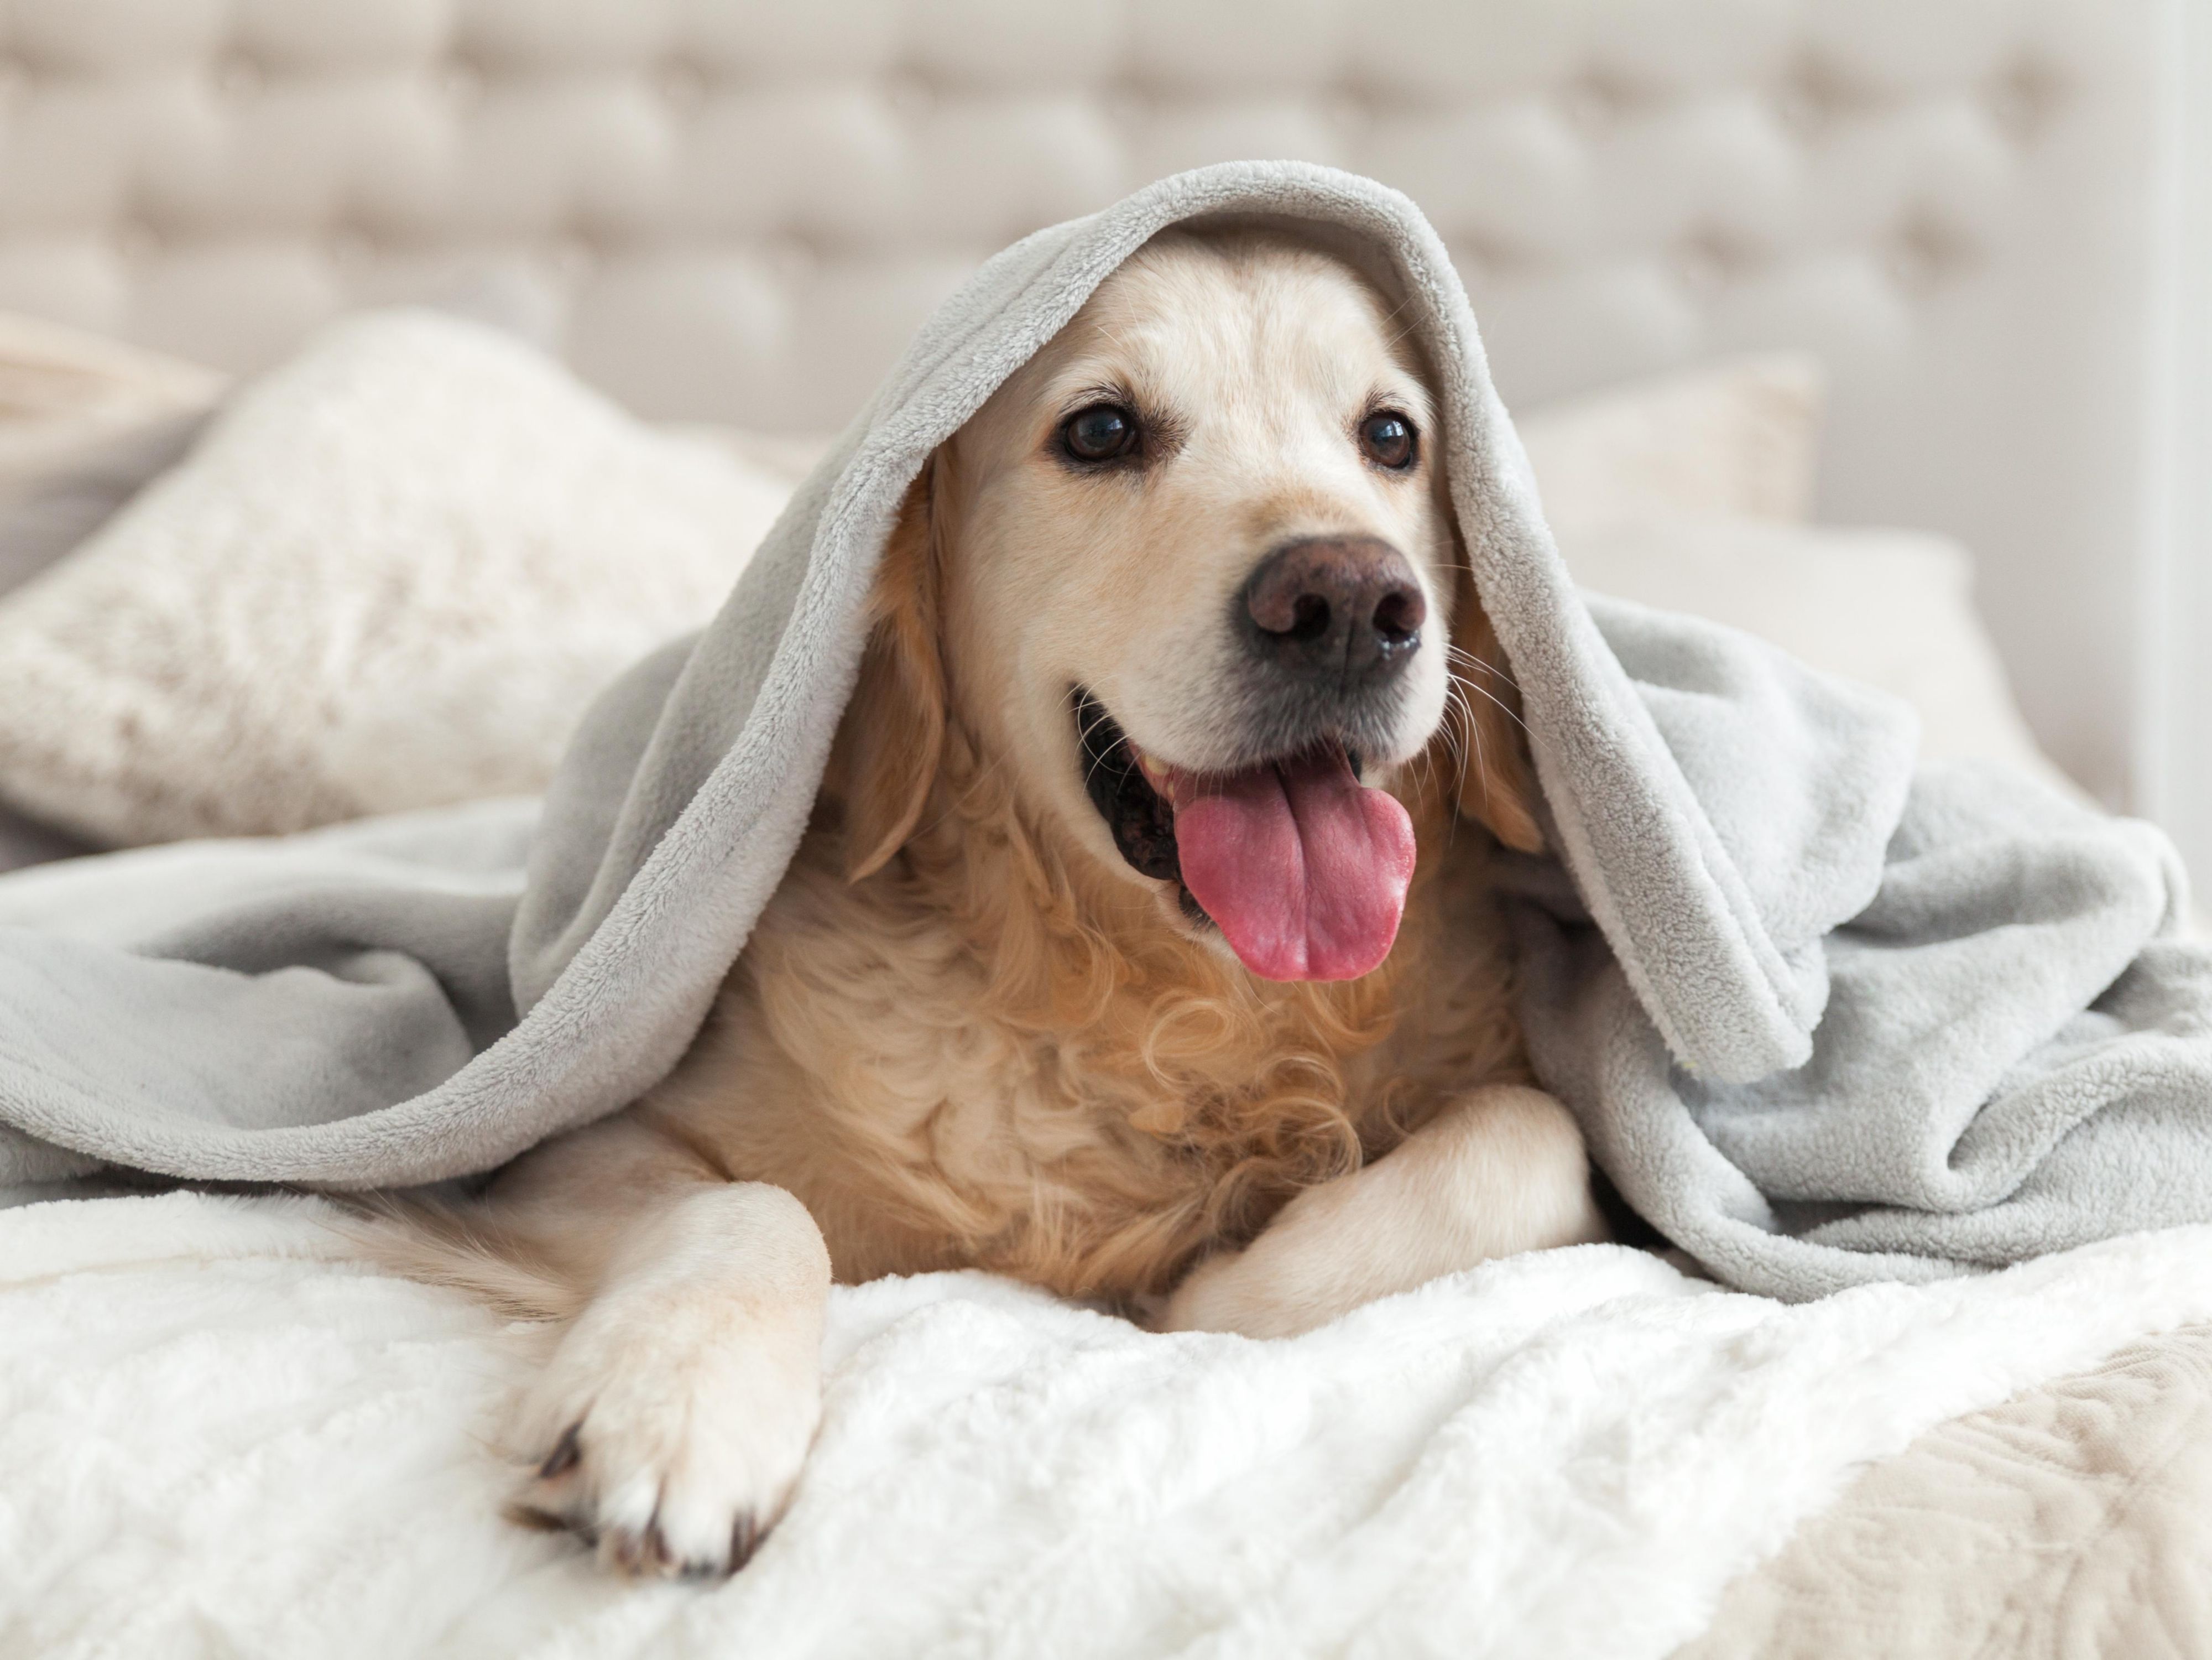 Pets are always welcome at the Holiday Inn Savannah S - I-95 Gateway. For a $50 refundable fee for the entire stay, bring your pet along with you for your next vacation, or stay over to your final destination. 